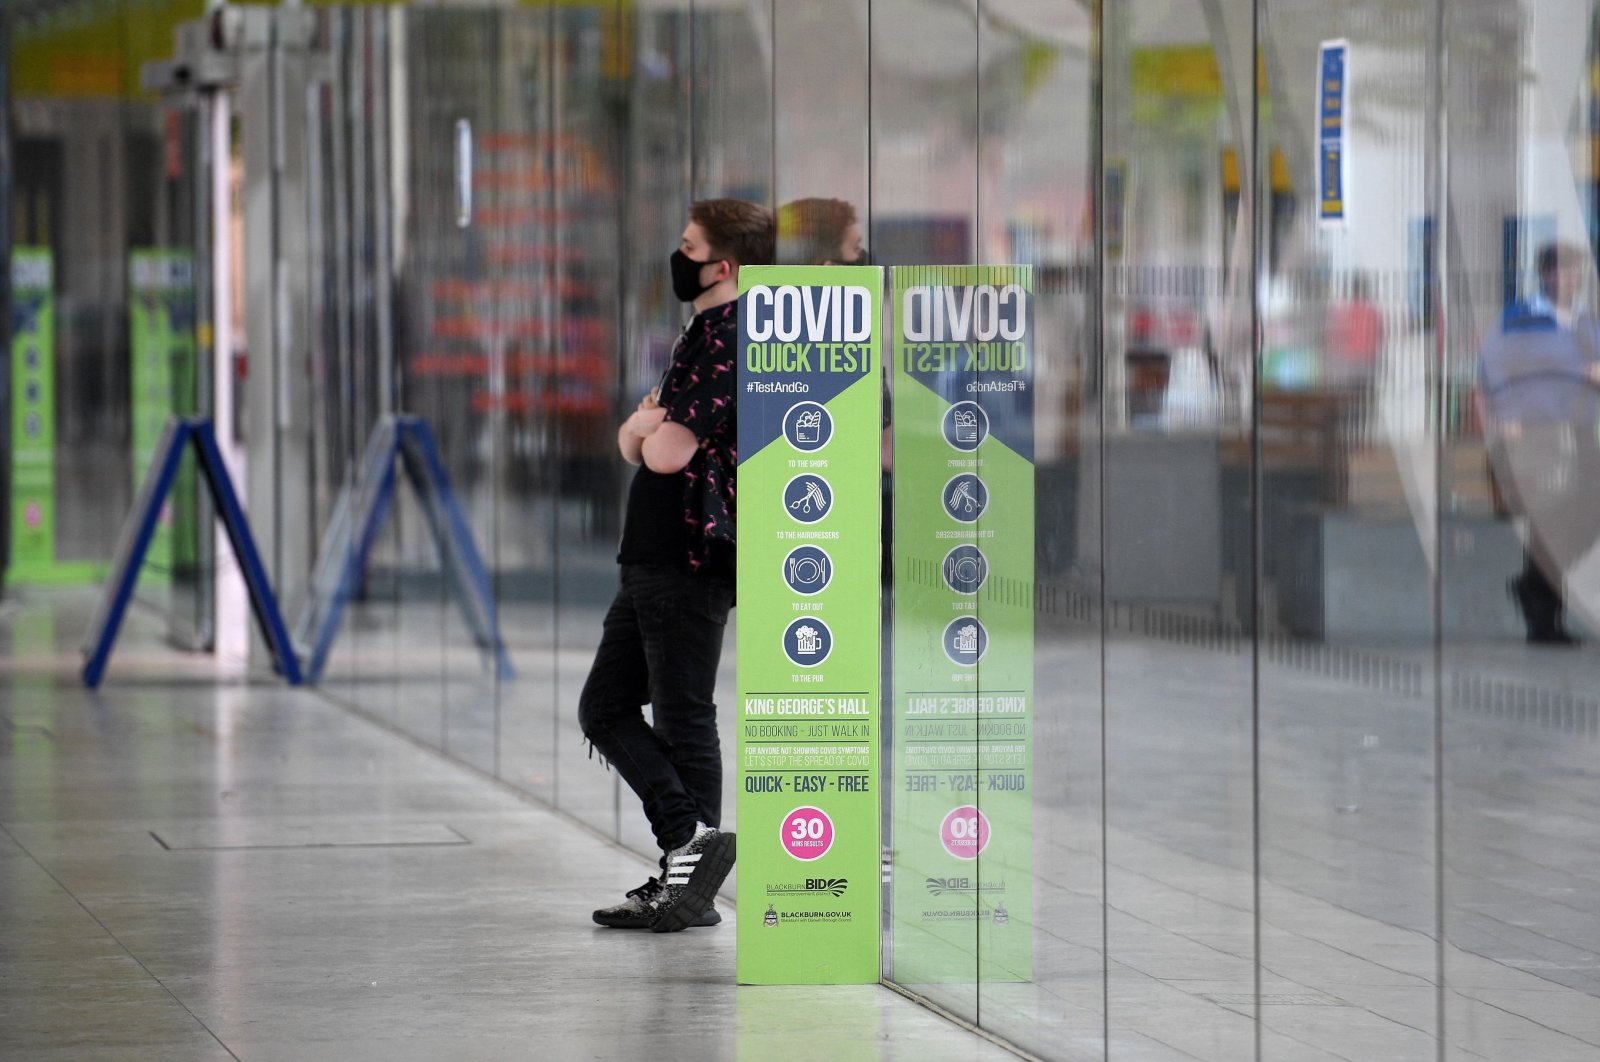 A man wearing a face-covering stands by a COVID-19 information sign near the Bus Station in Blackburn, northwest England, June 16, 2021. (AFP Photo)